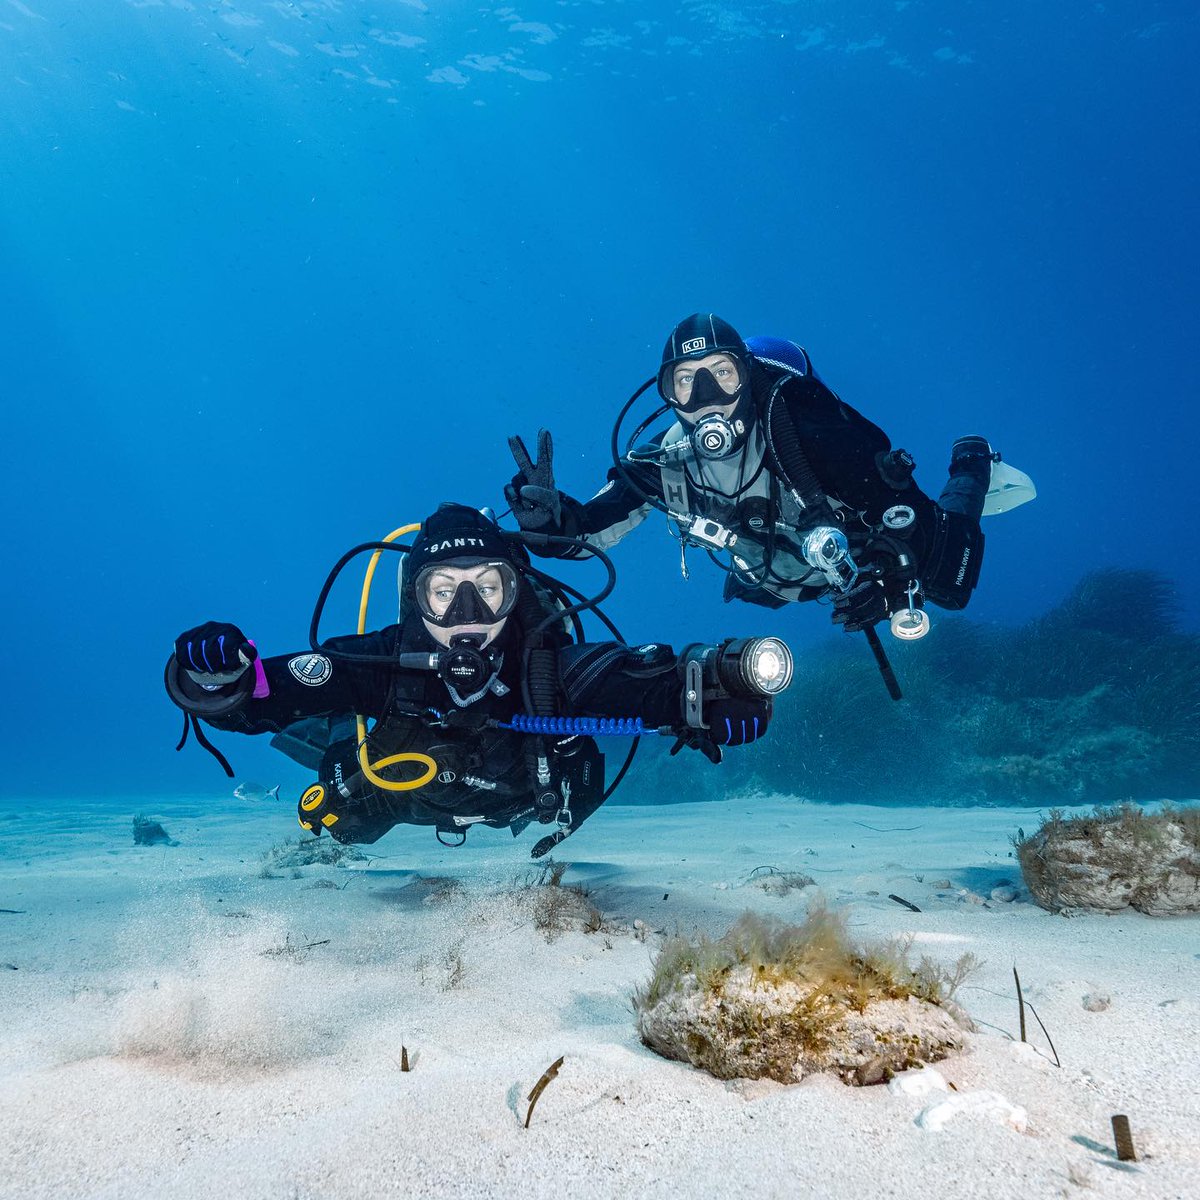 Diving with her is always fun, I miss you my diver sister
.
.
.
.
#scubadiving #scubapics #drysuit #maltadiving #divingmalta #divinggirl #santi #santidrysuit #scubadiving